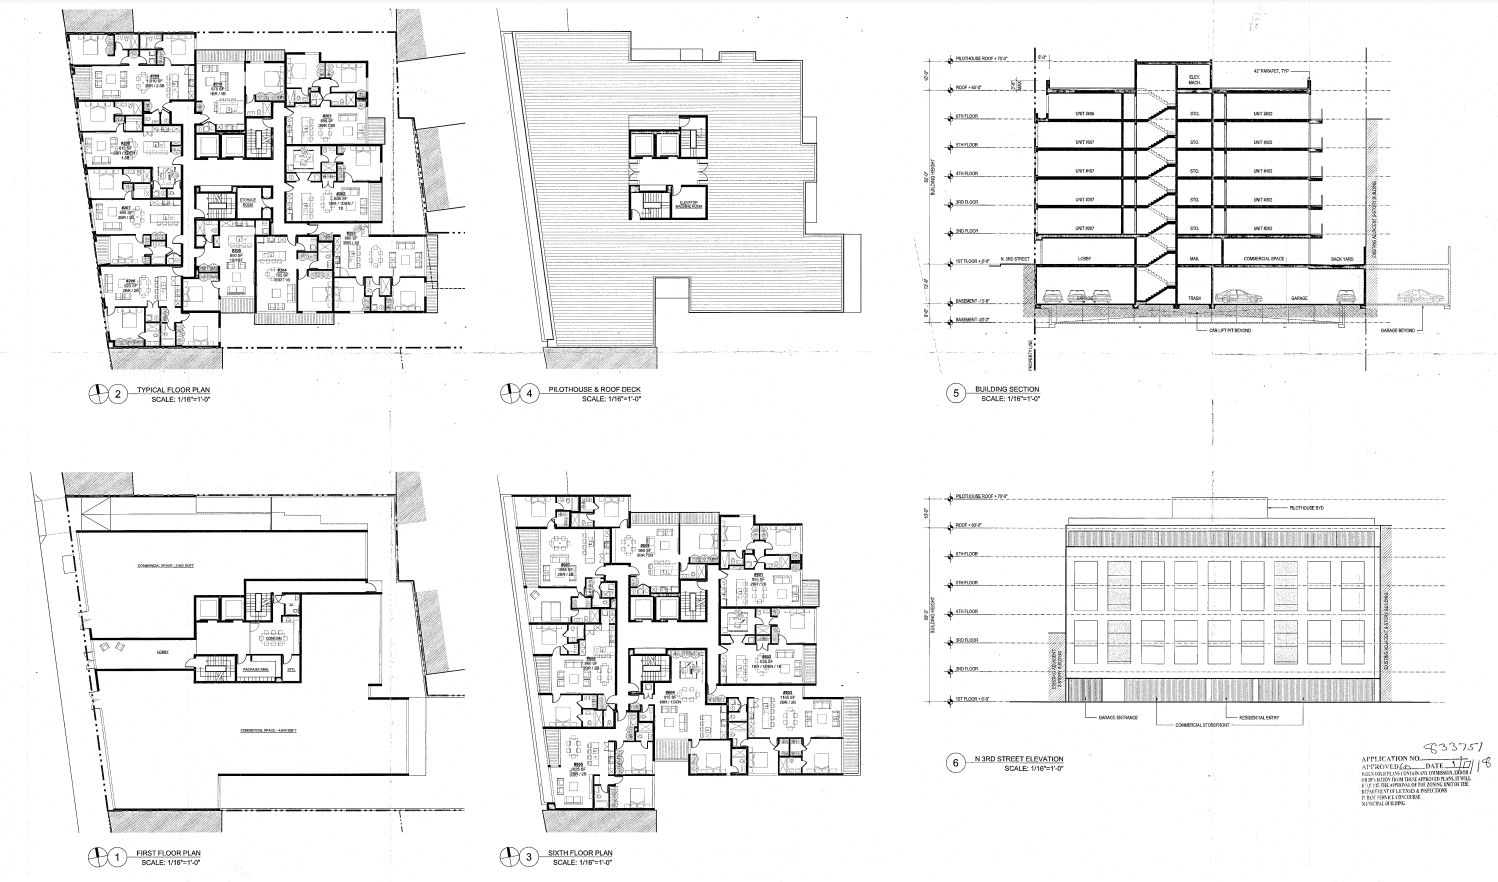 817-21 North 3rd Street. Zoning submission. Credit: Atrium Design Group via the City of Philadelphia